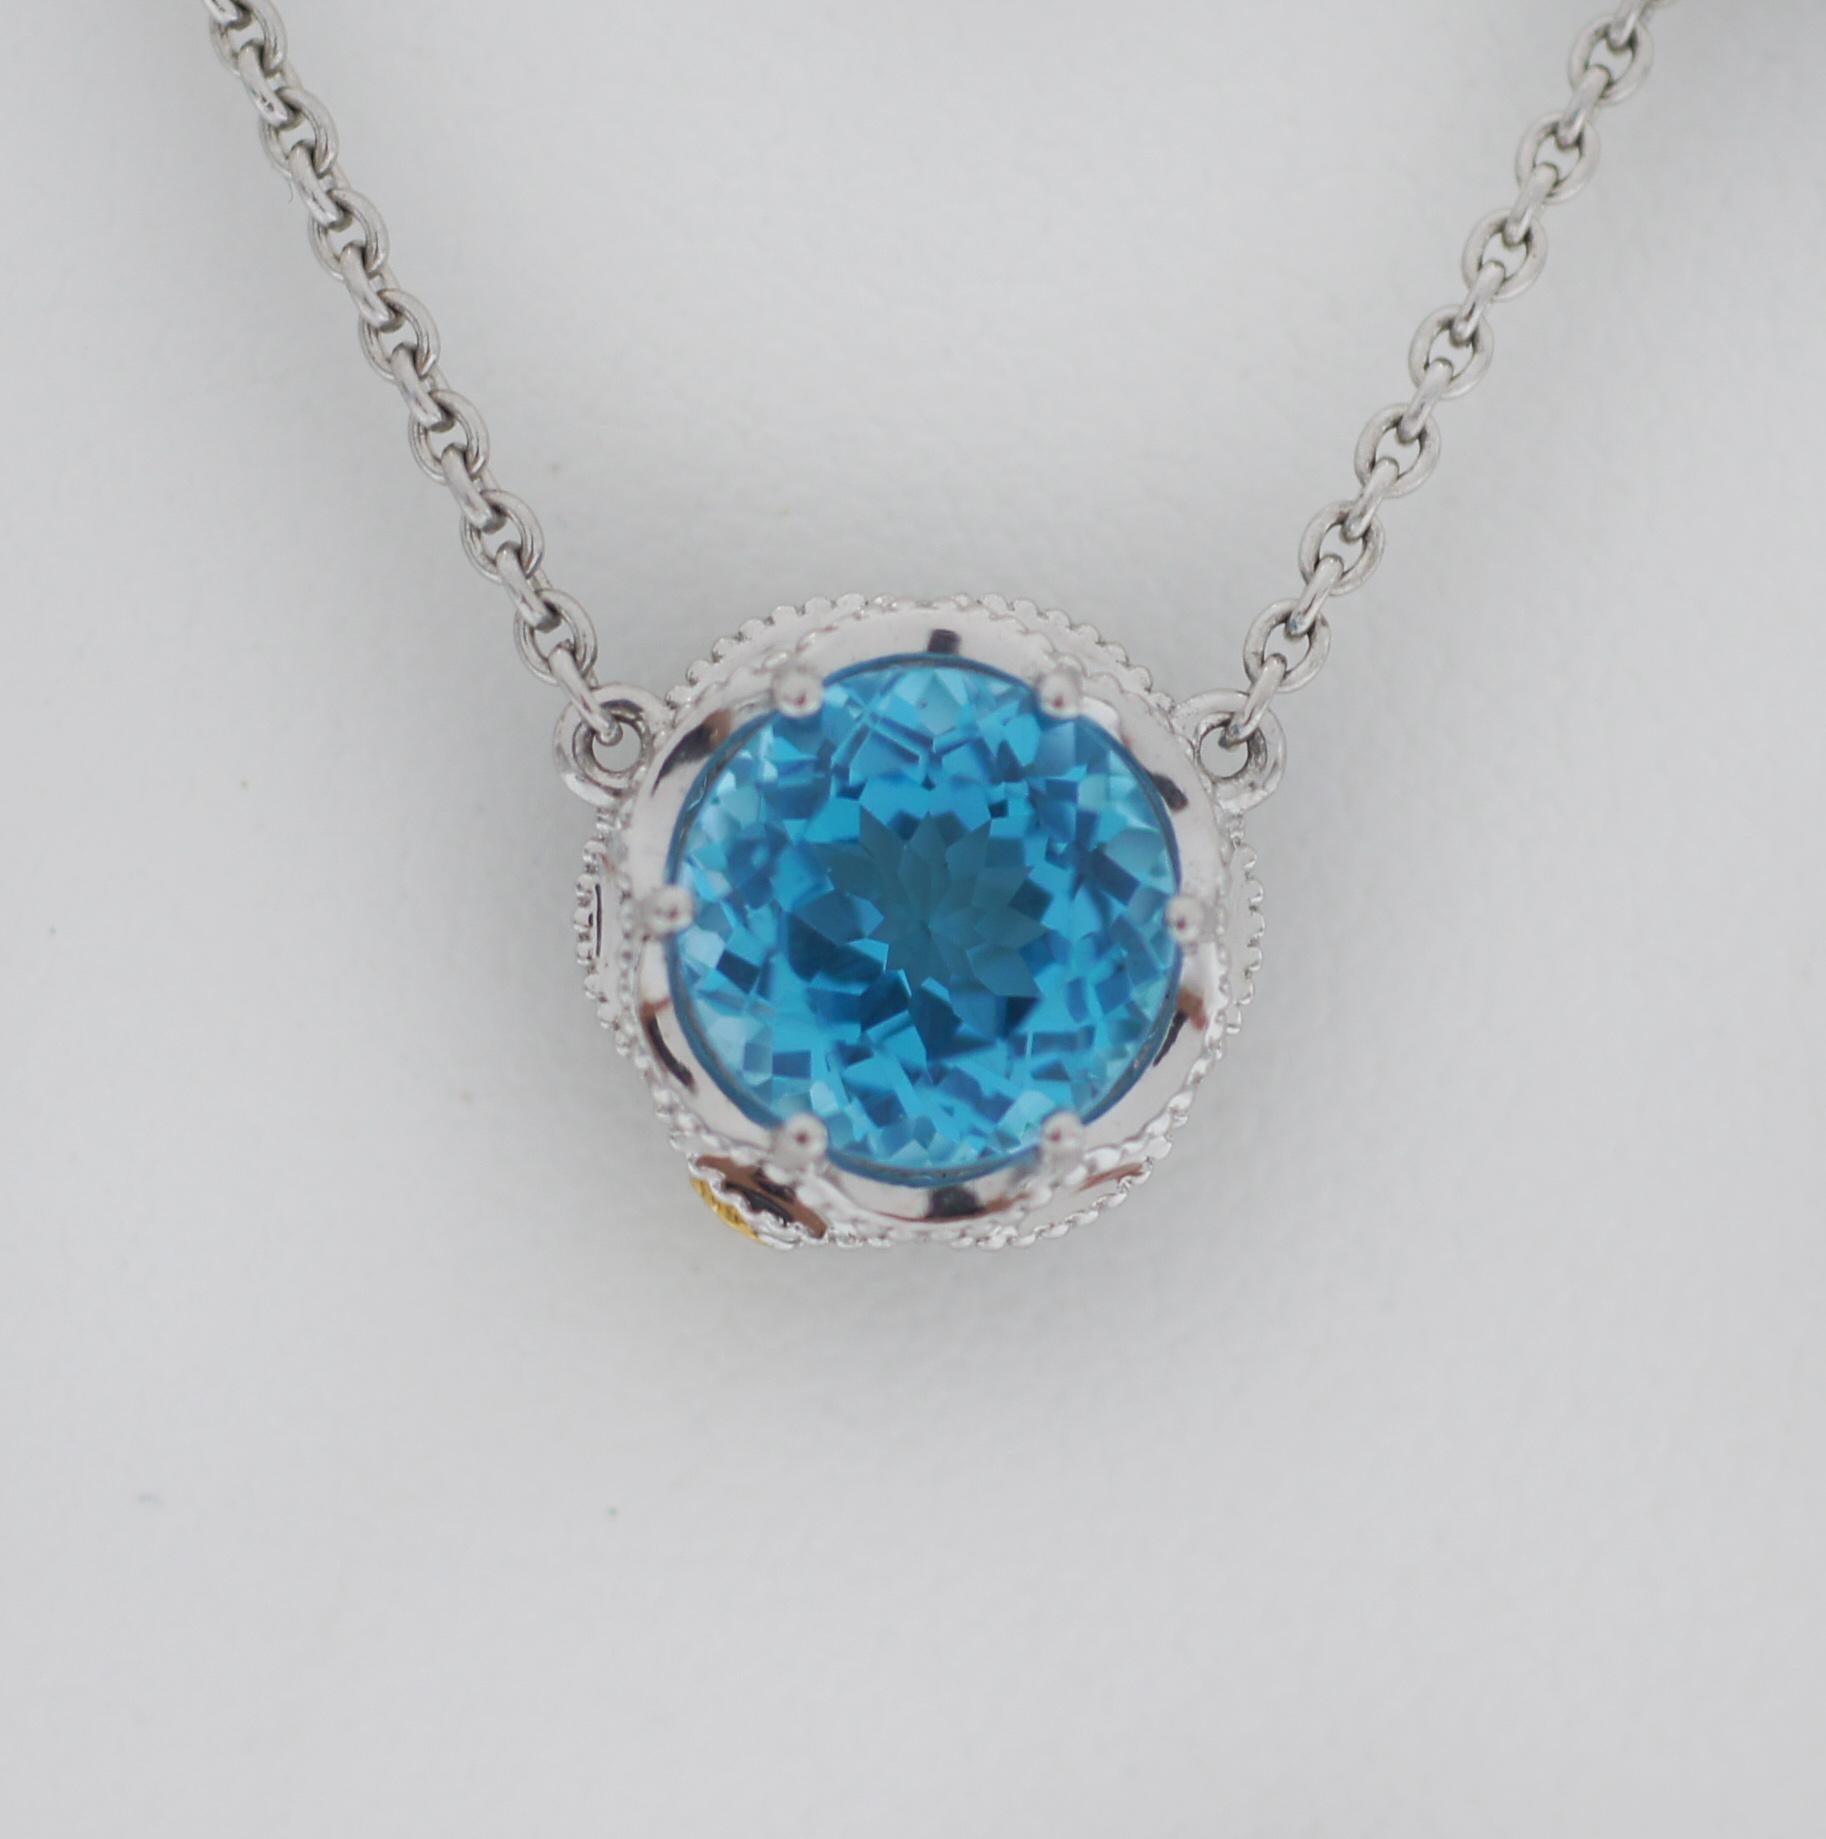 Tacori
This multifaceted Swiss Blue Topaz gemstone pendant will sparkle with every beat of your heart. The gemstone is encased within a silver basket with Milgrain detailing and shines like a true beauty.
925 Sterling Silver
18K Gold 
Pendant